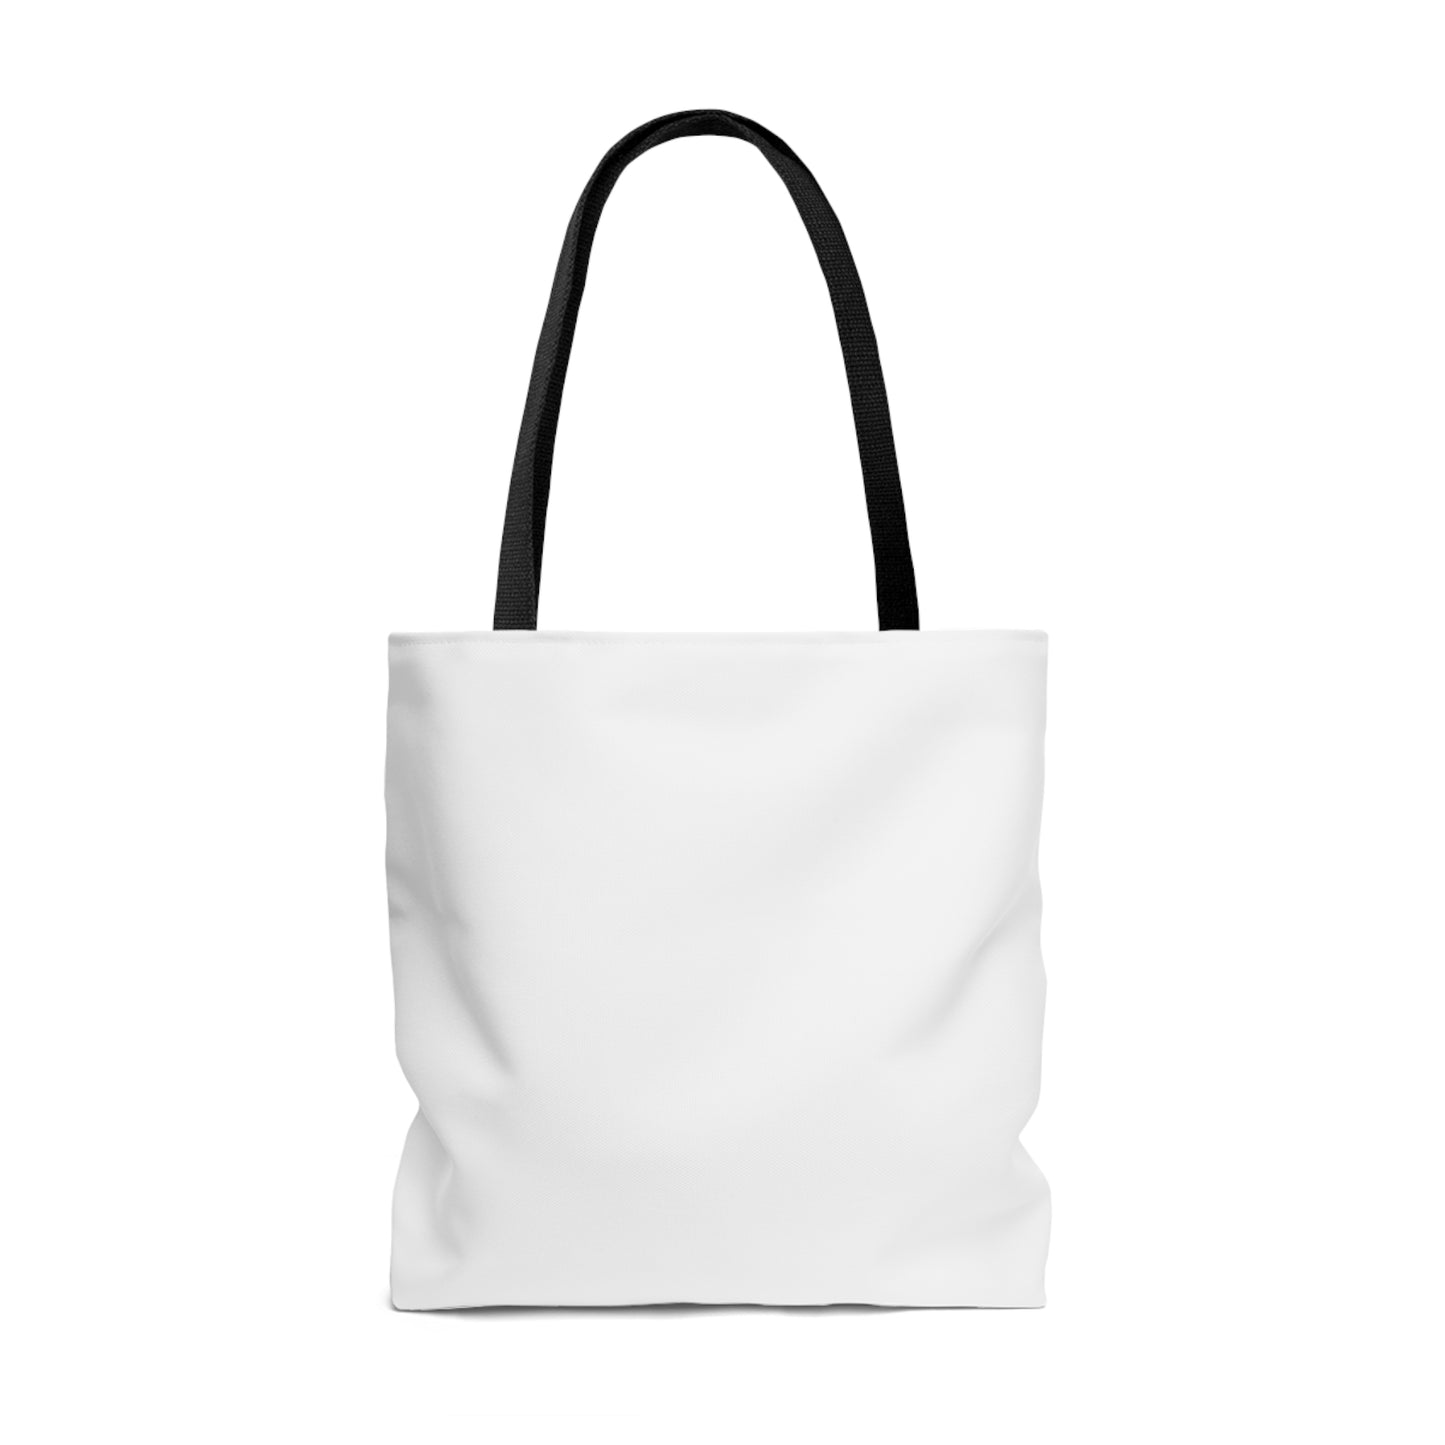 K19 Security Solutions Team Two Tote Bag